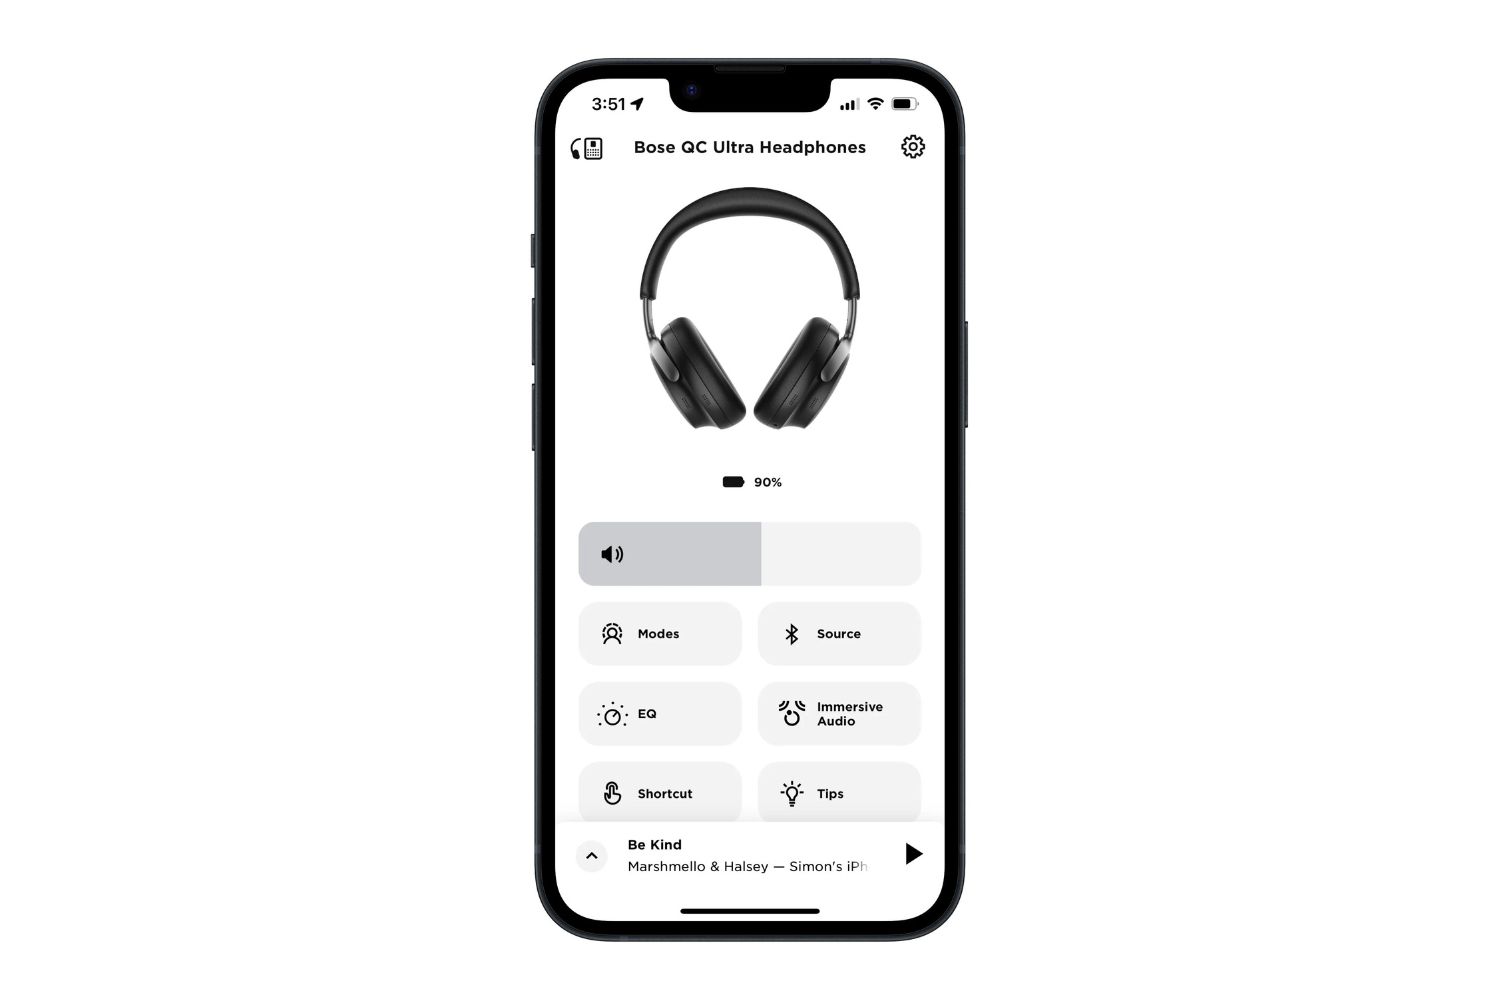 How Do I Connect My Bose Noise Cancelling Headphones To My IPhone?